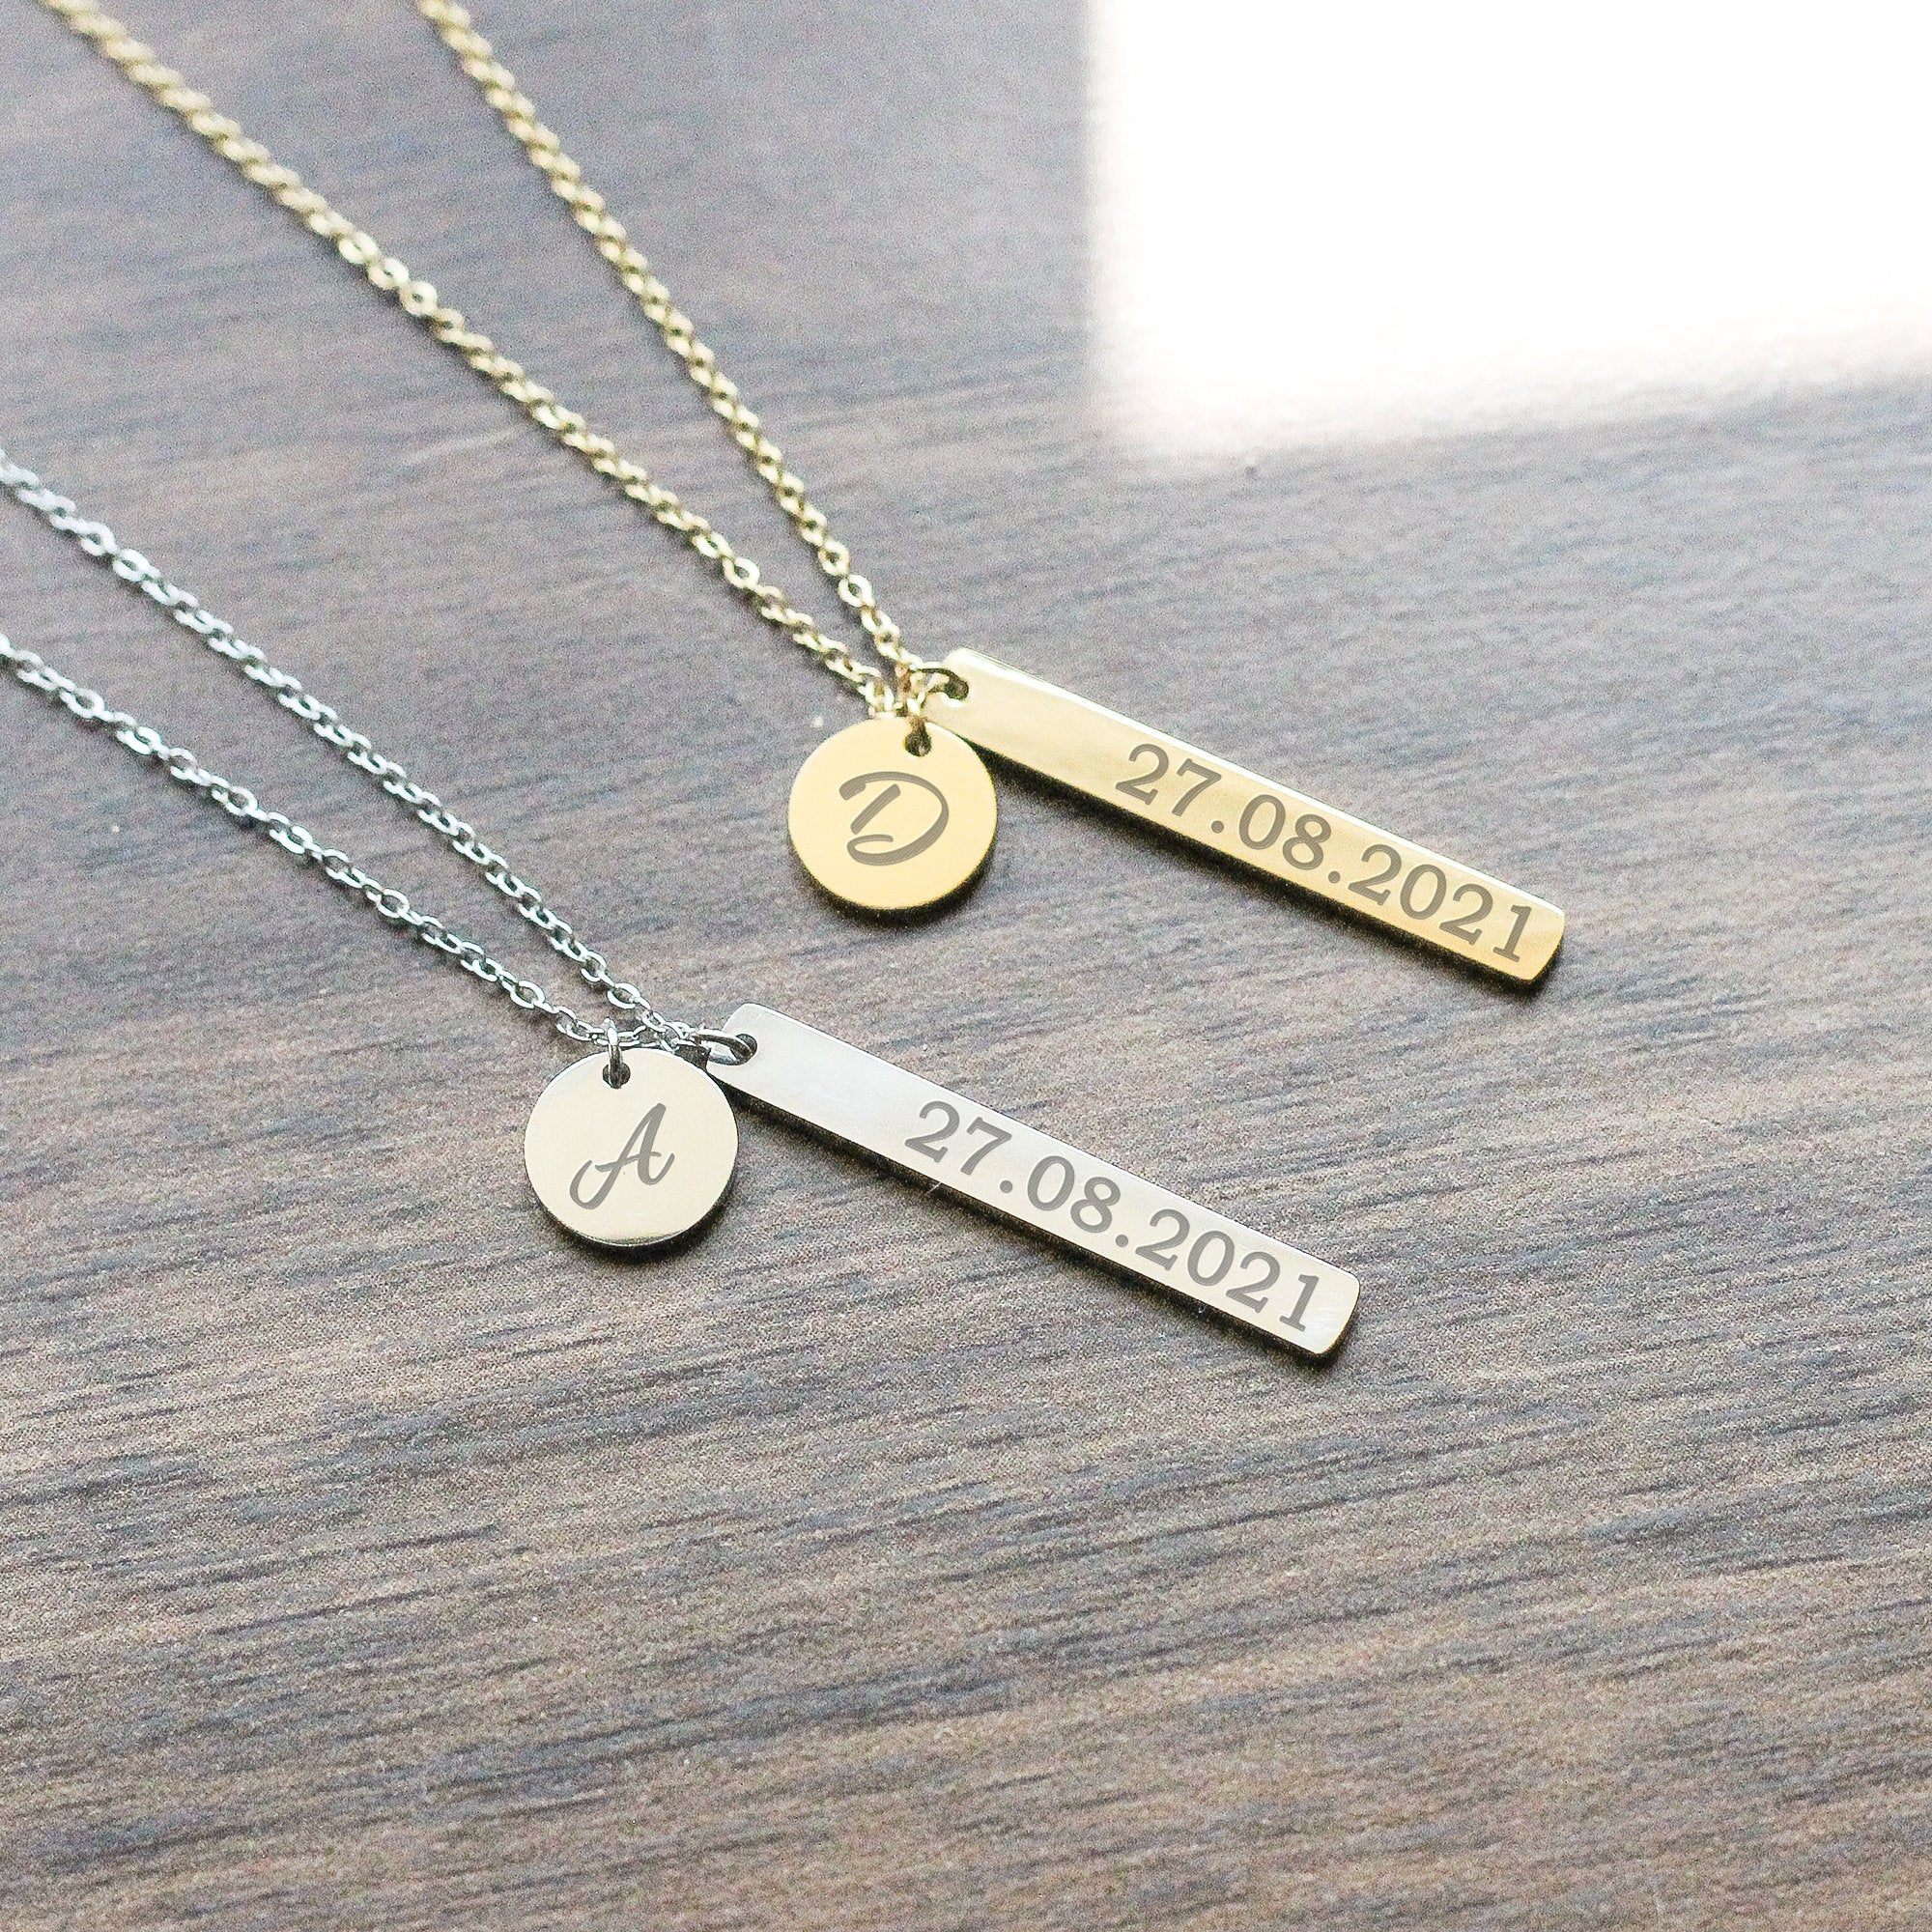 Men's Personalised Spinner Necklace | Posh Totty Designs